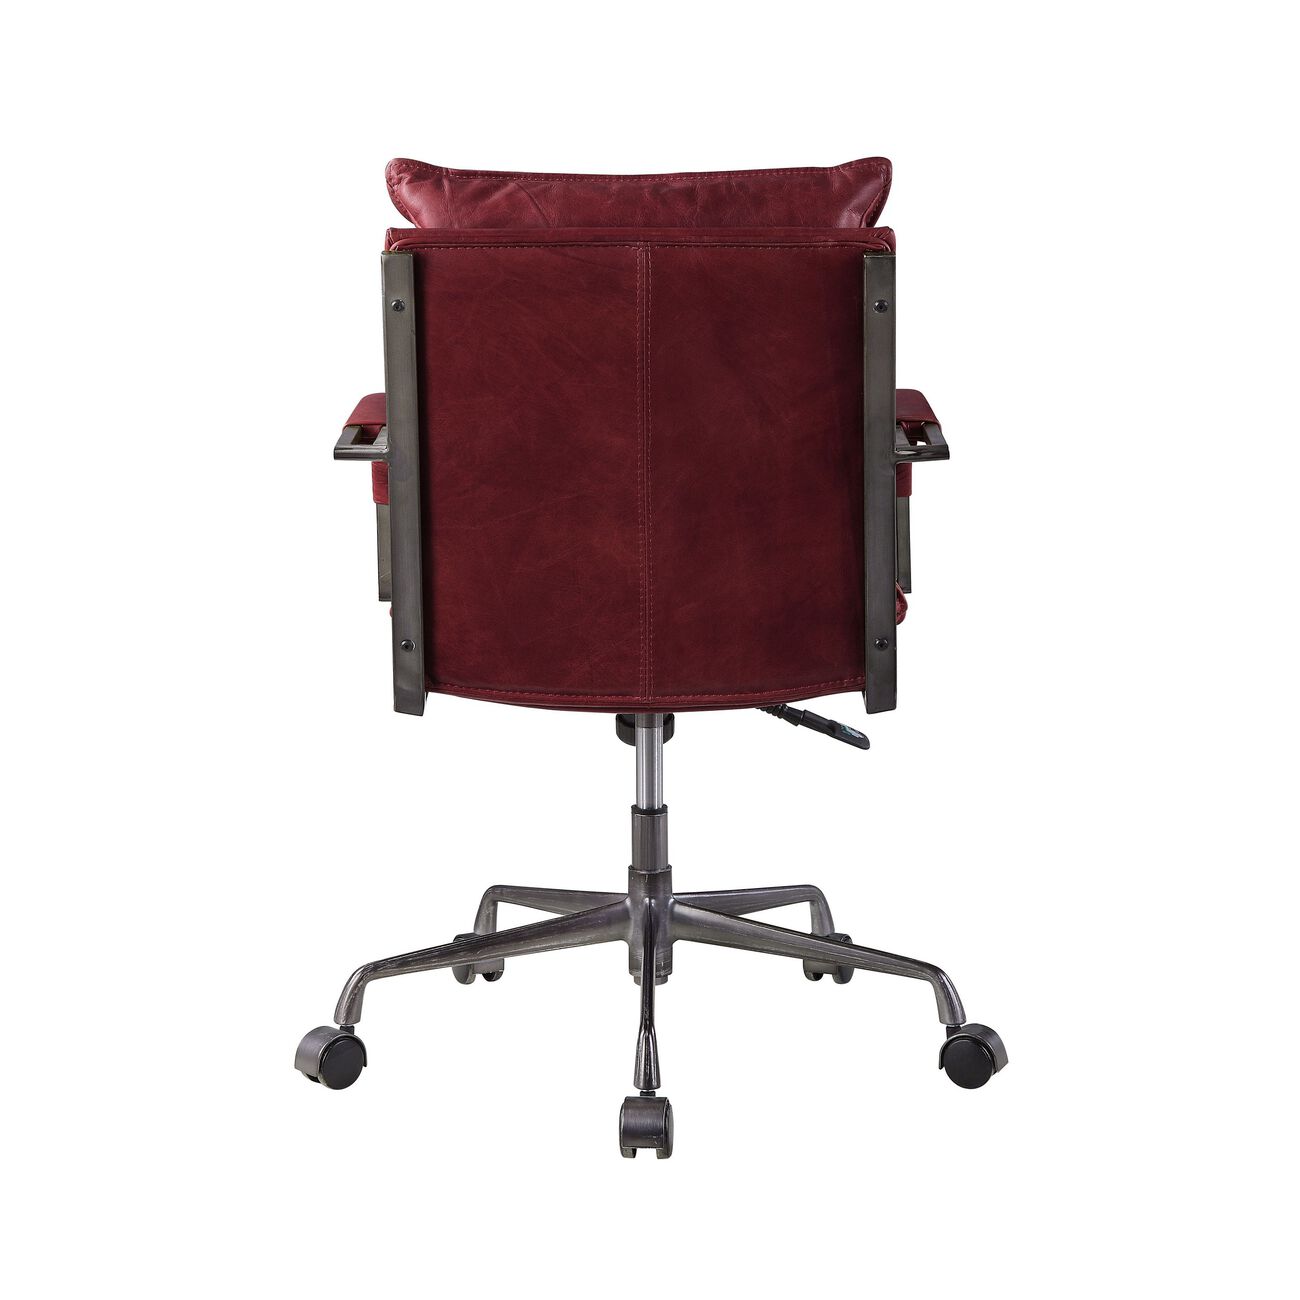 Swivel Leatherette Tufted Office Chair with Metal Star Base, Red